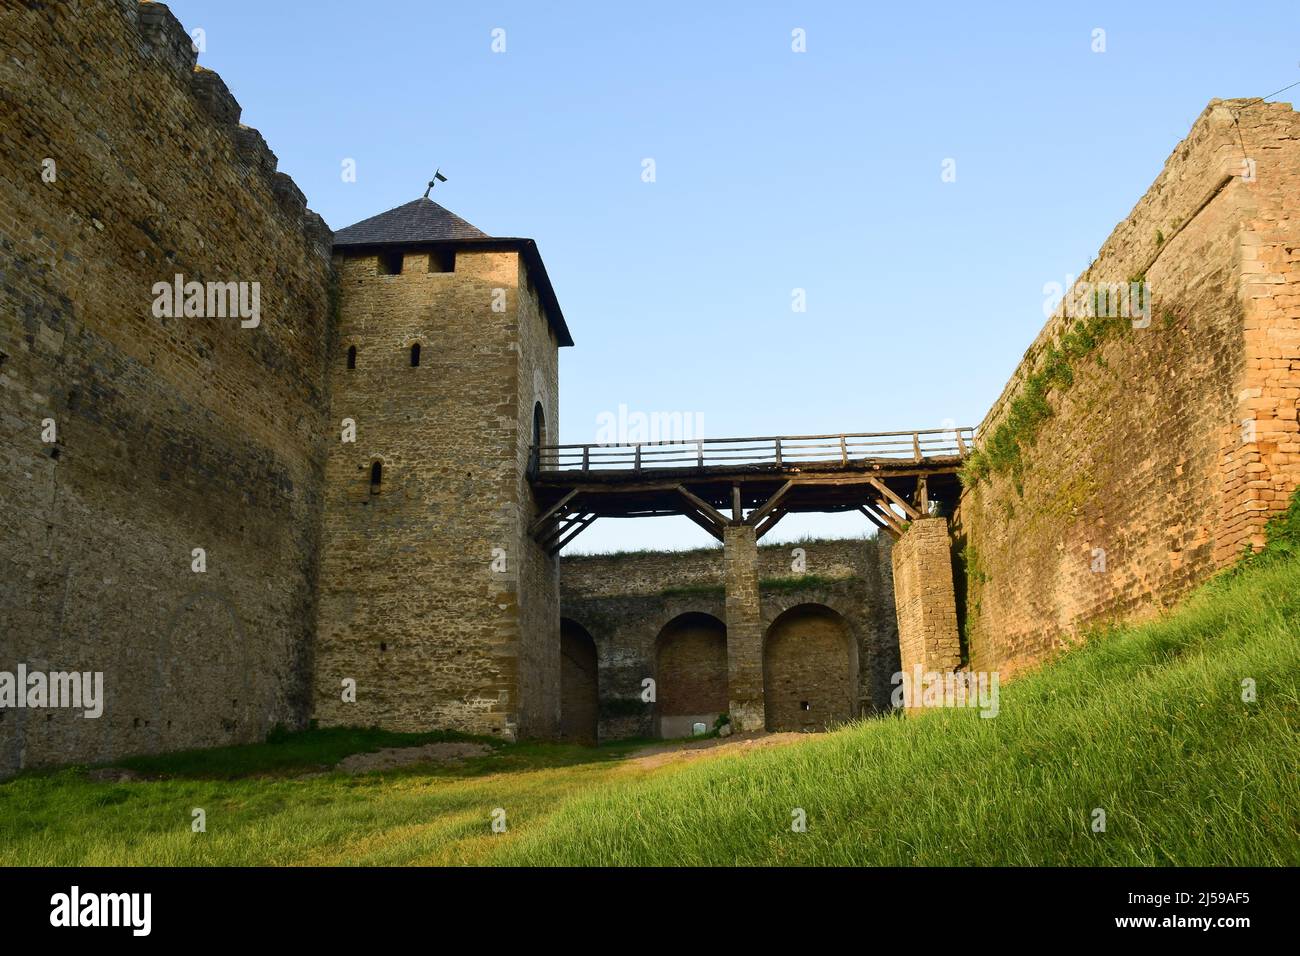 Wooden bridge to the tower of a medieval stone fortress with high battlements and loopholes. View from a low angle Stock Photo